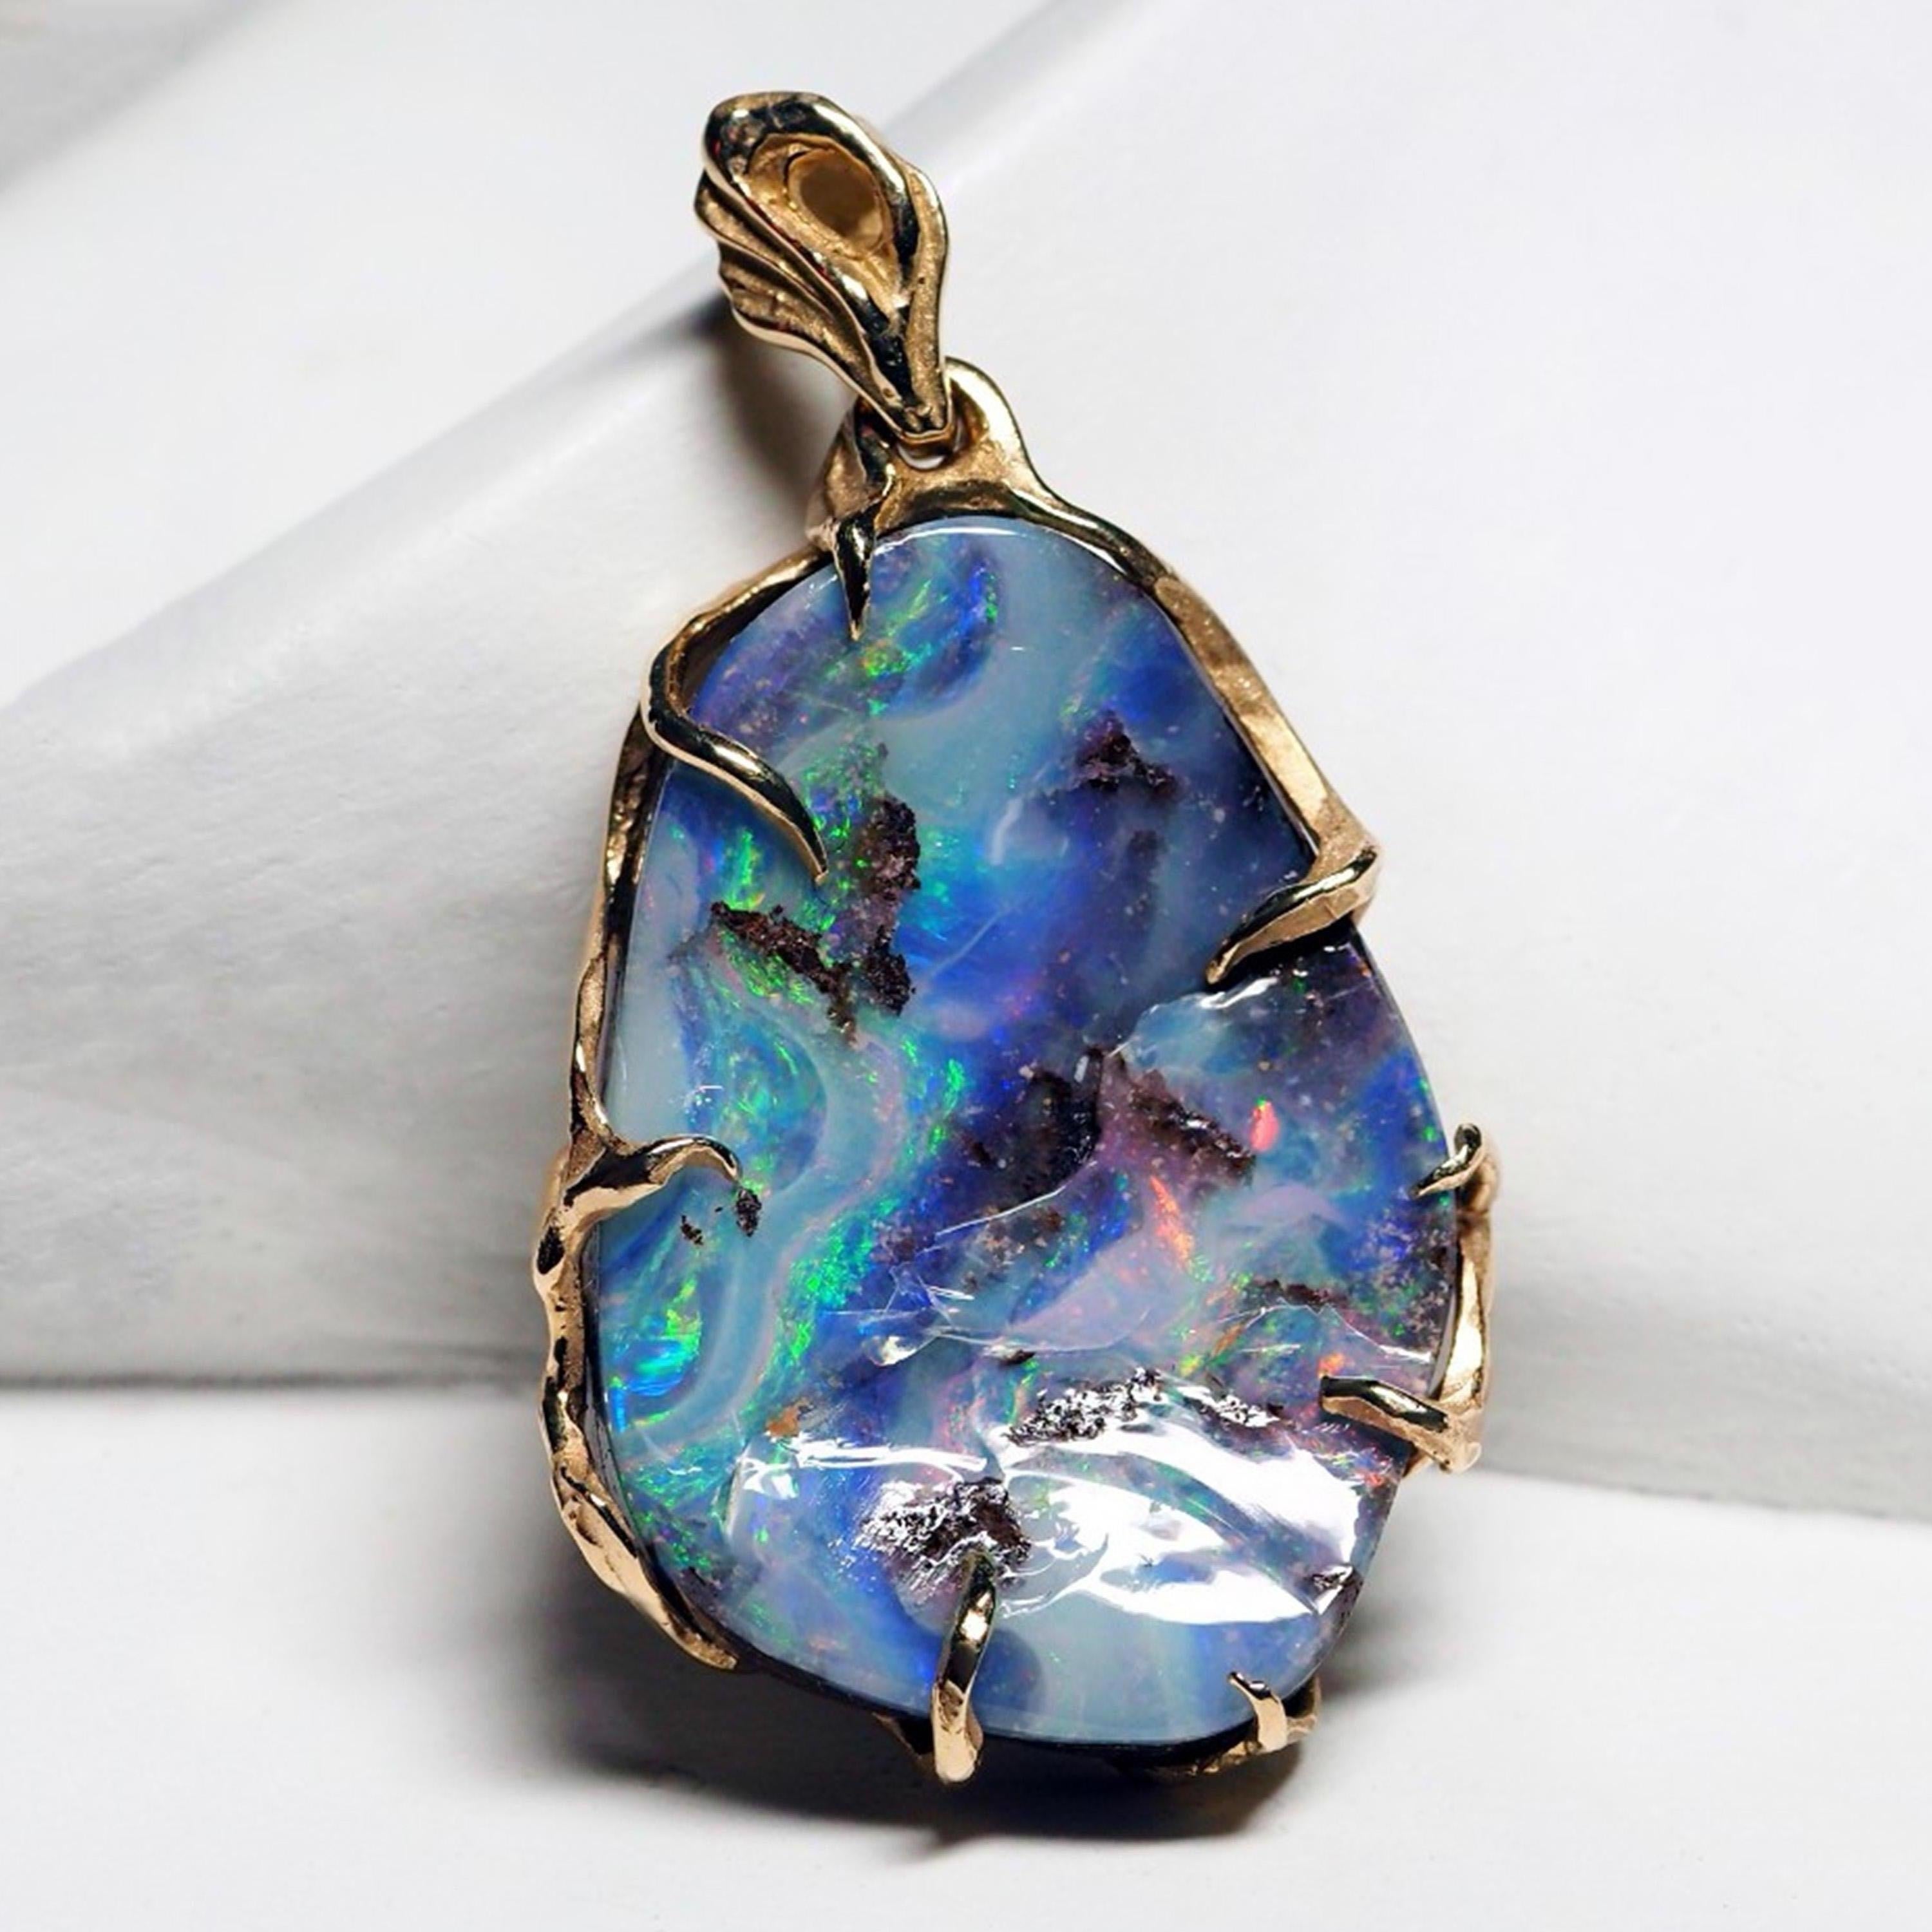 14K yellow gold pendant necklace with Boulder Opal

opal origin - Australia

opal measurements - 0.12 x 0.67 x 1.02 in / 3 x 17 x 26 mm

opal weight - 22.25 carats

pendant length - 1.22 in / 31 mm

pendant weight - 7.21 grams